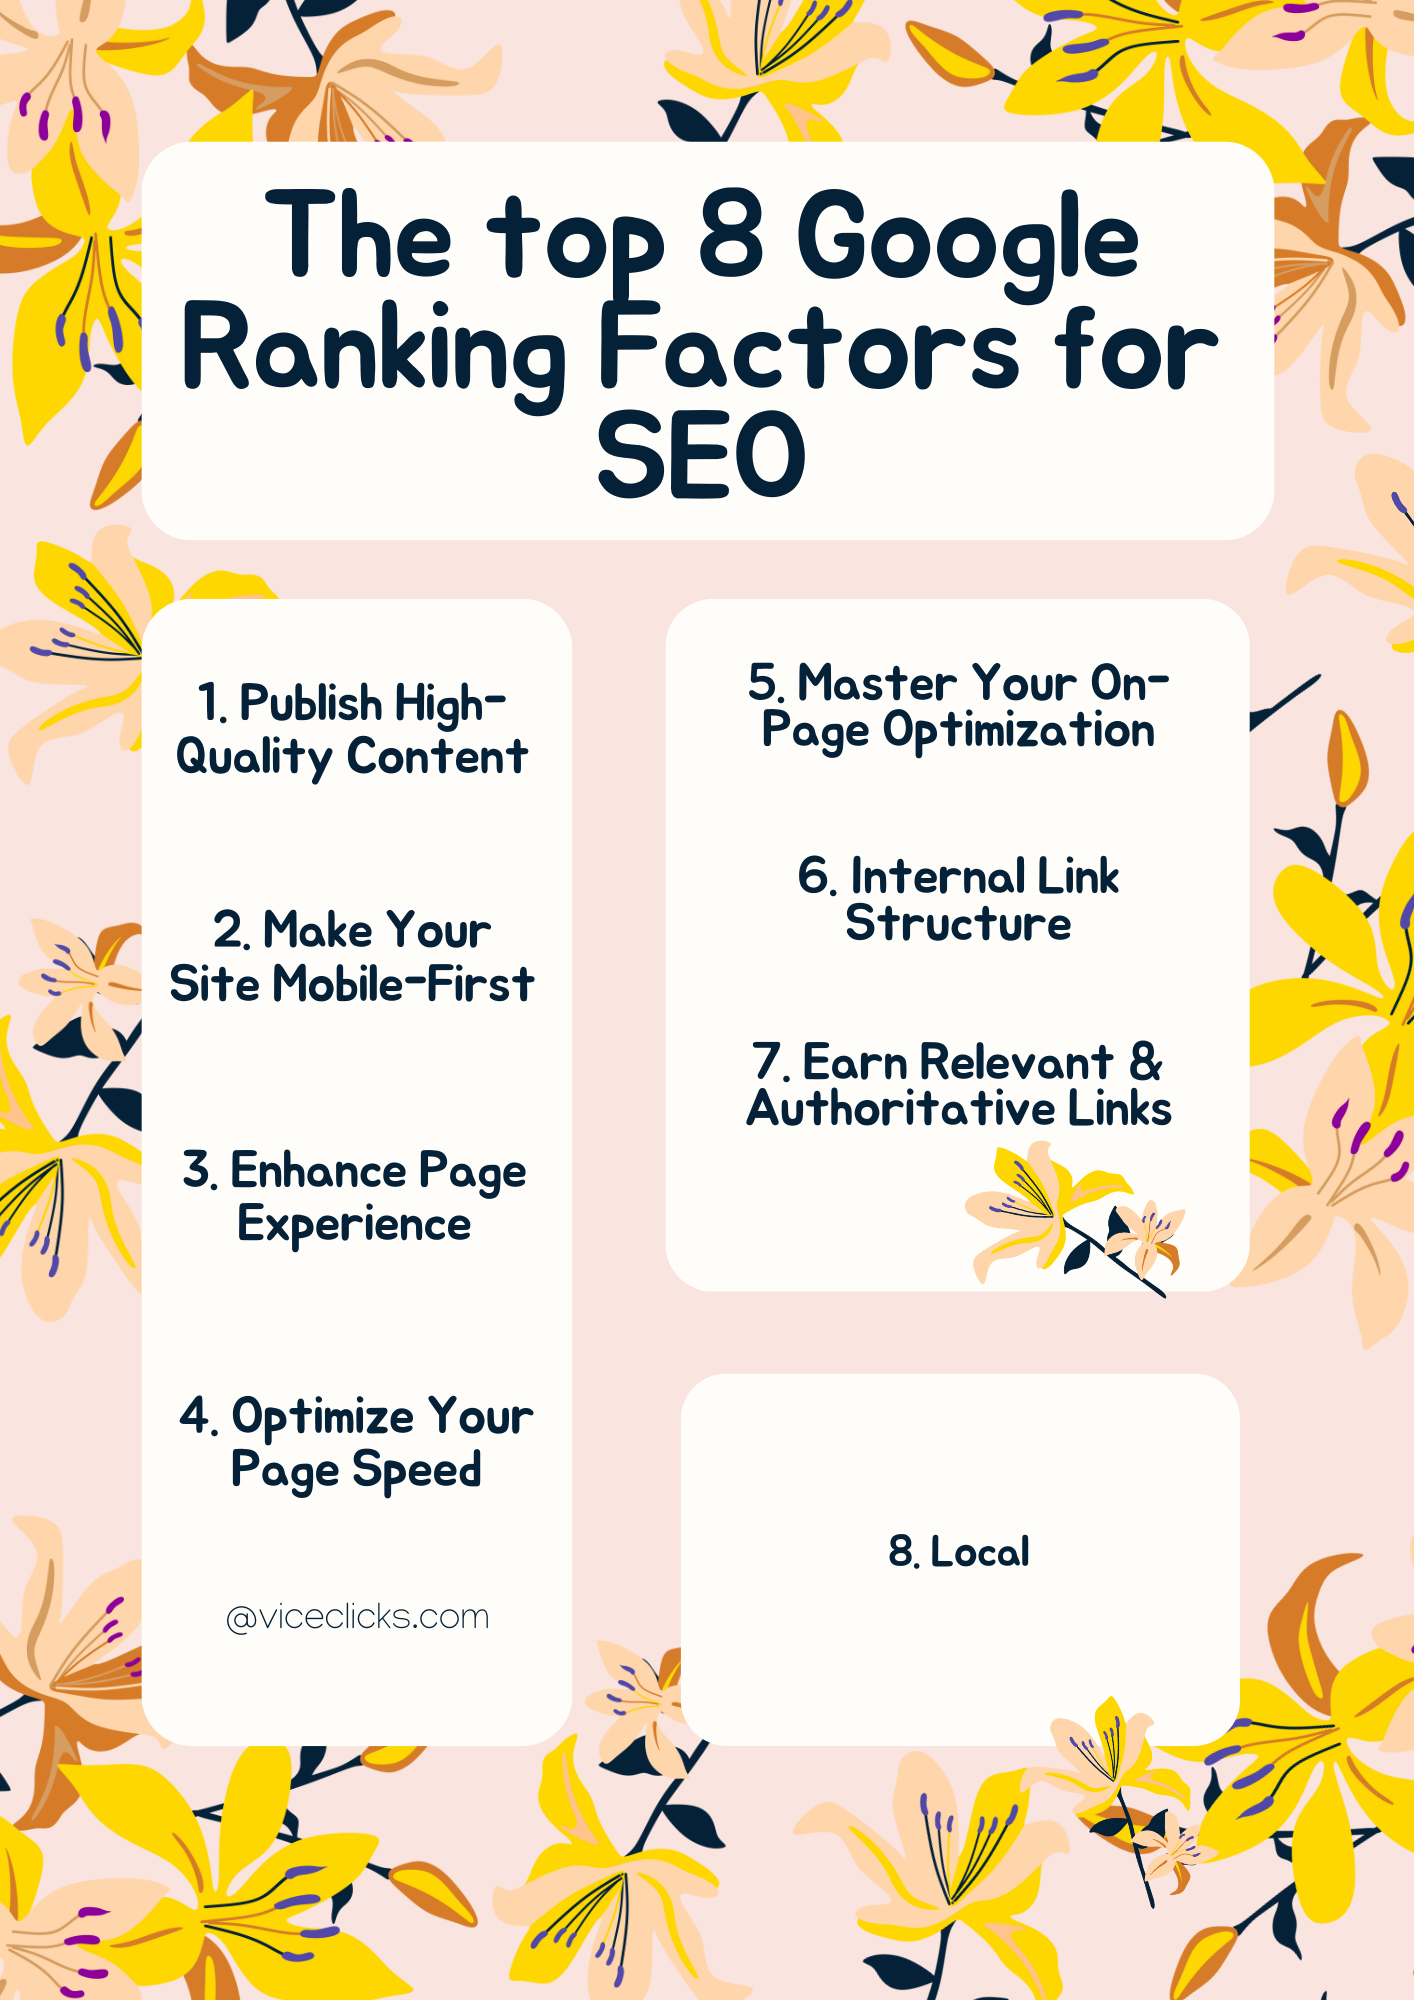 The top 8 Google Ranking Factors for SEO